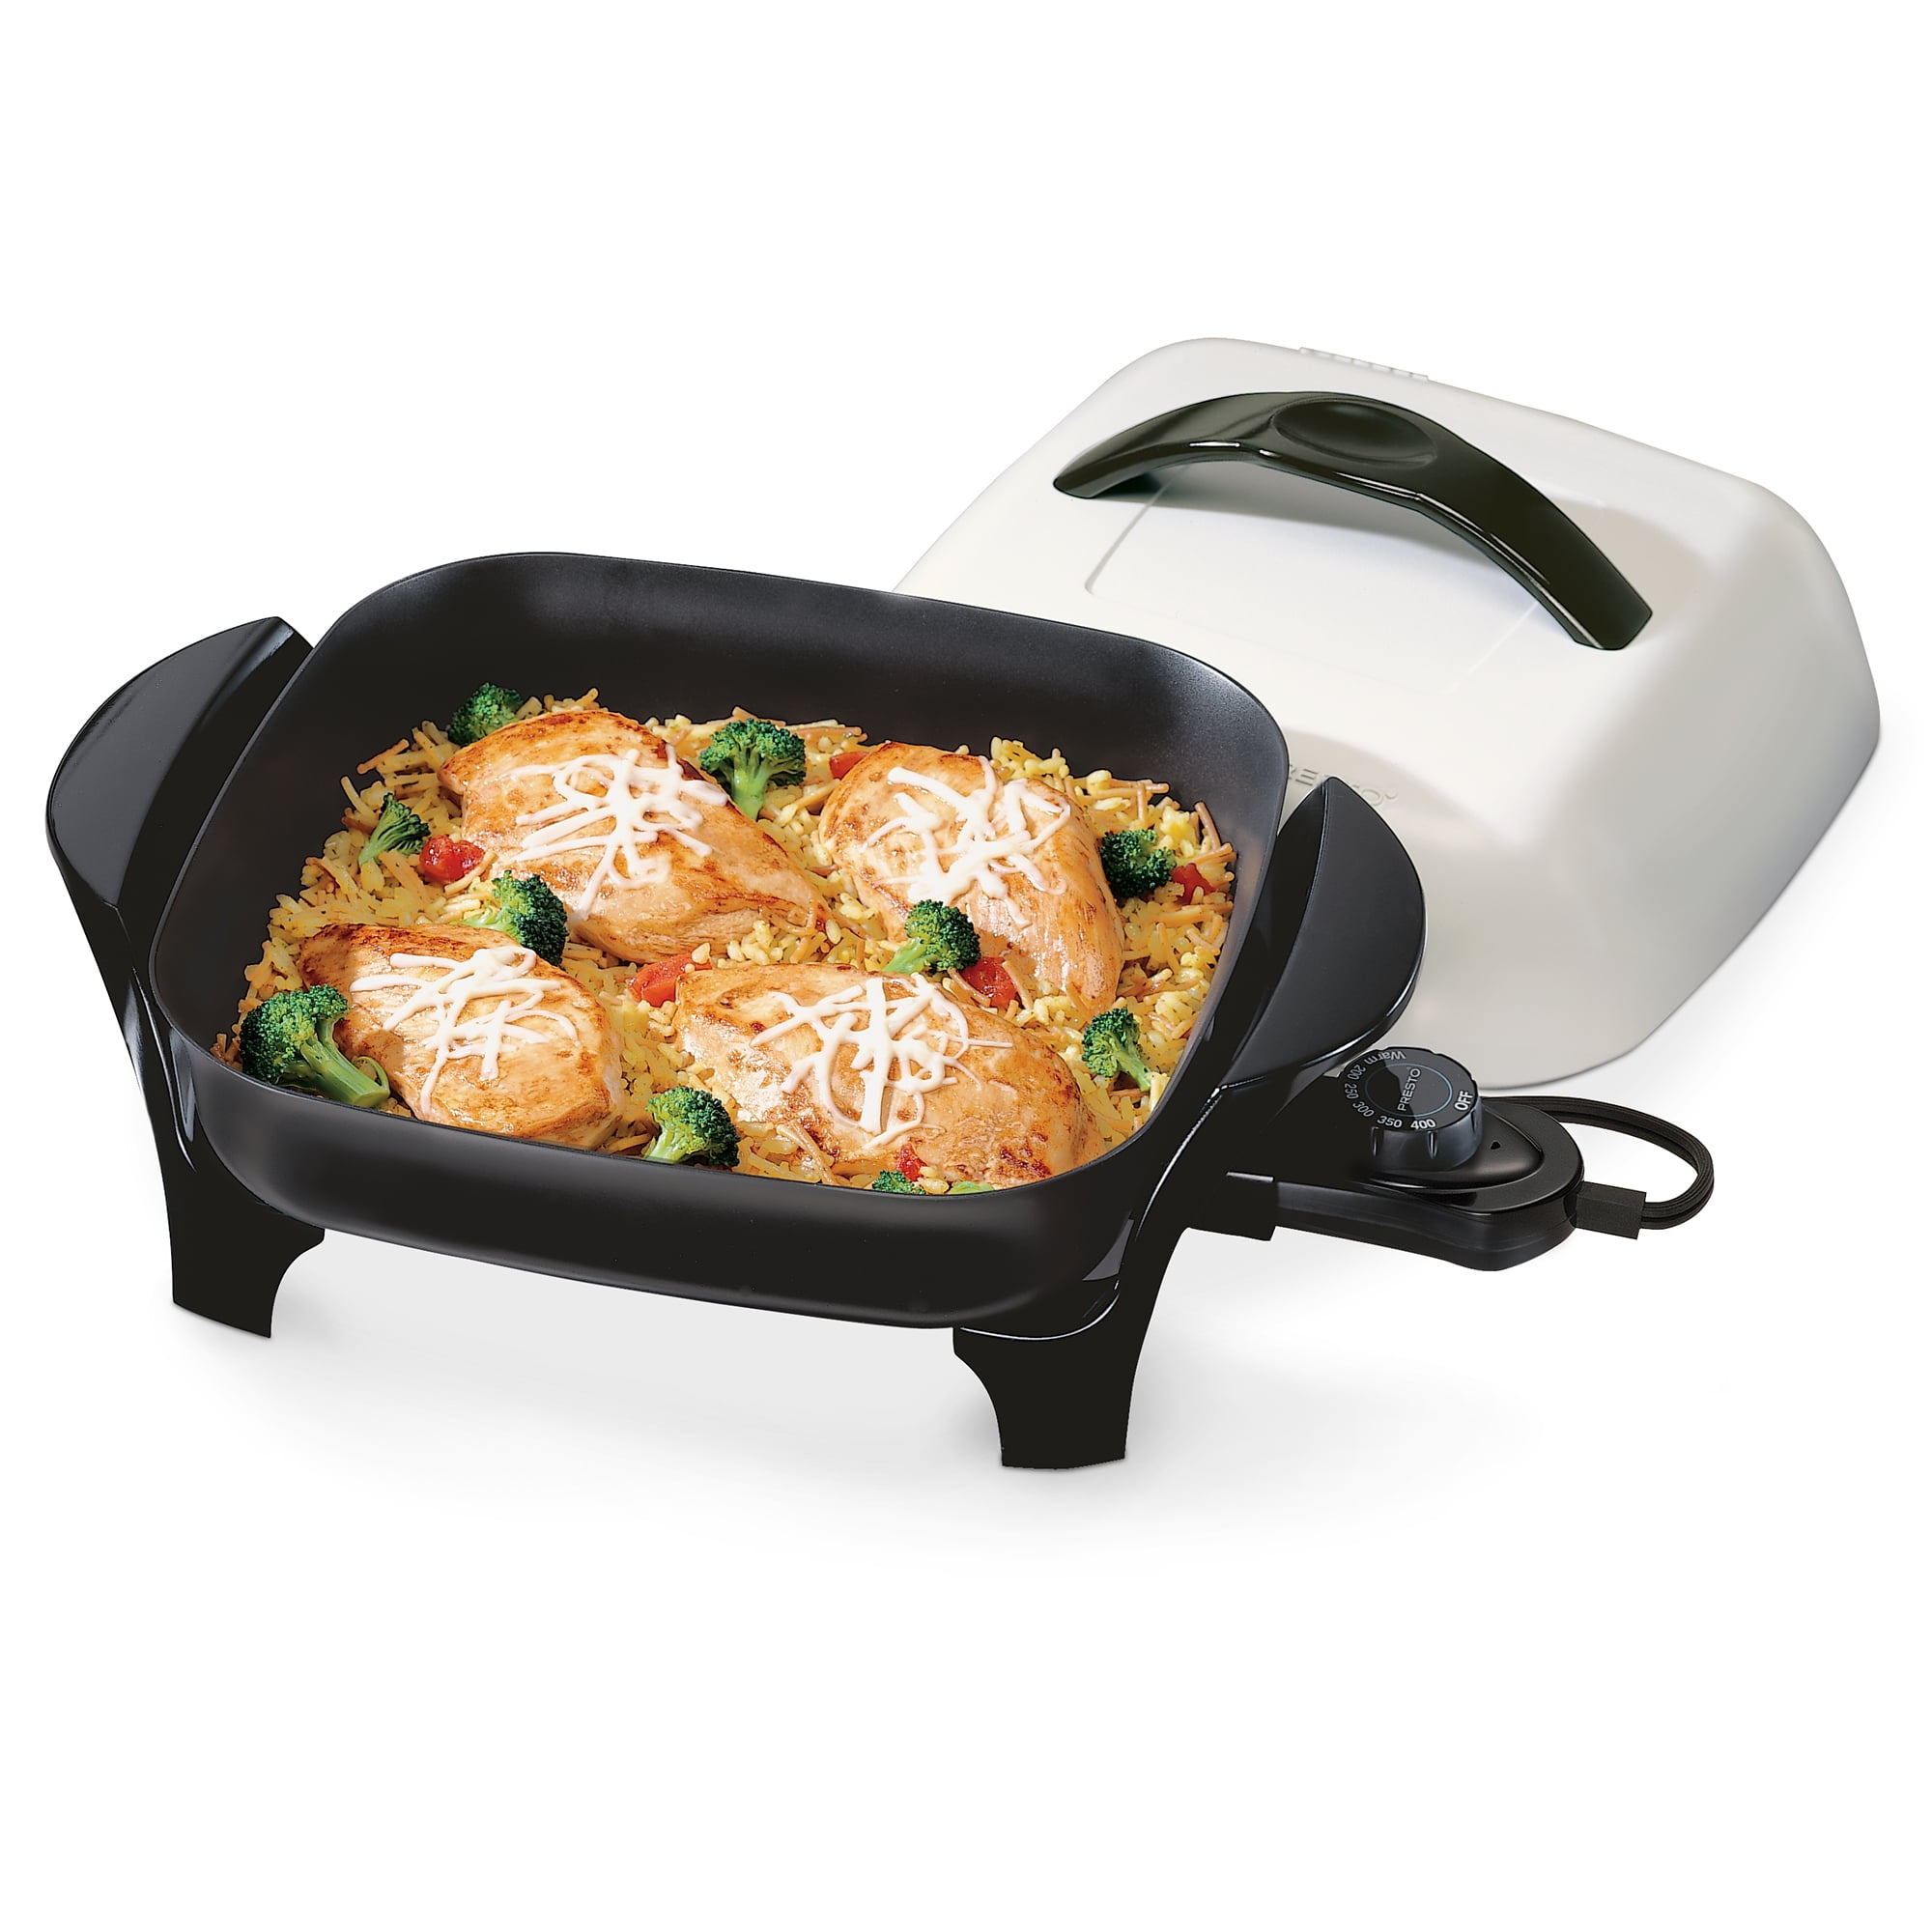 Presto Covered Electric Skillet - Black, 11 in - Fry's Food Stores